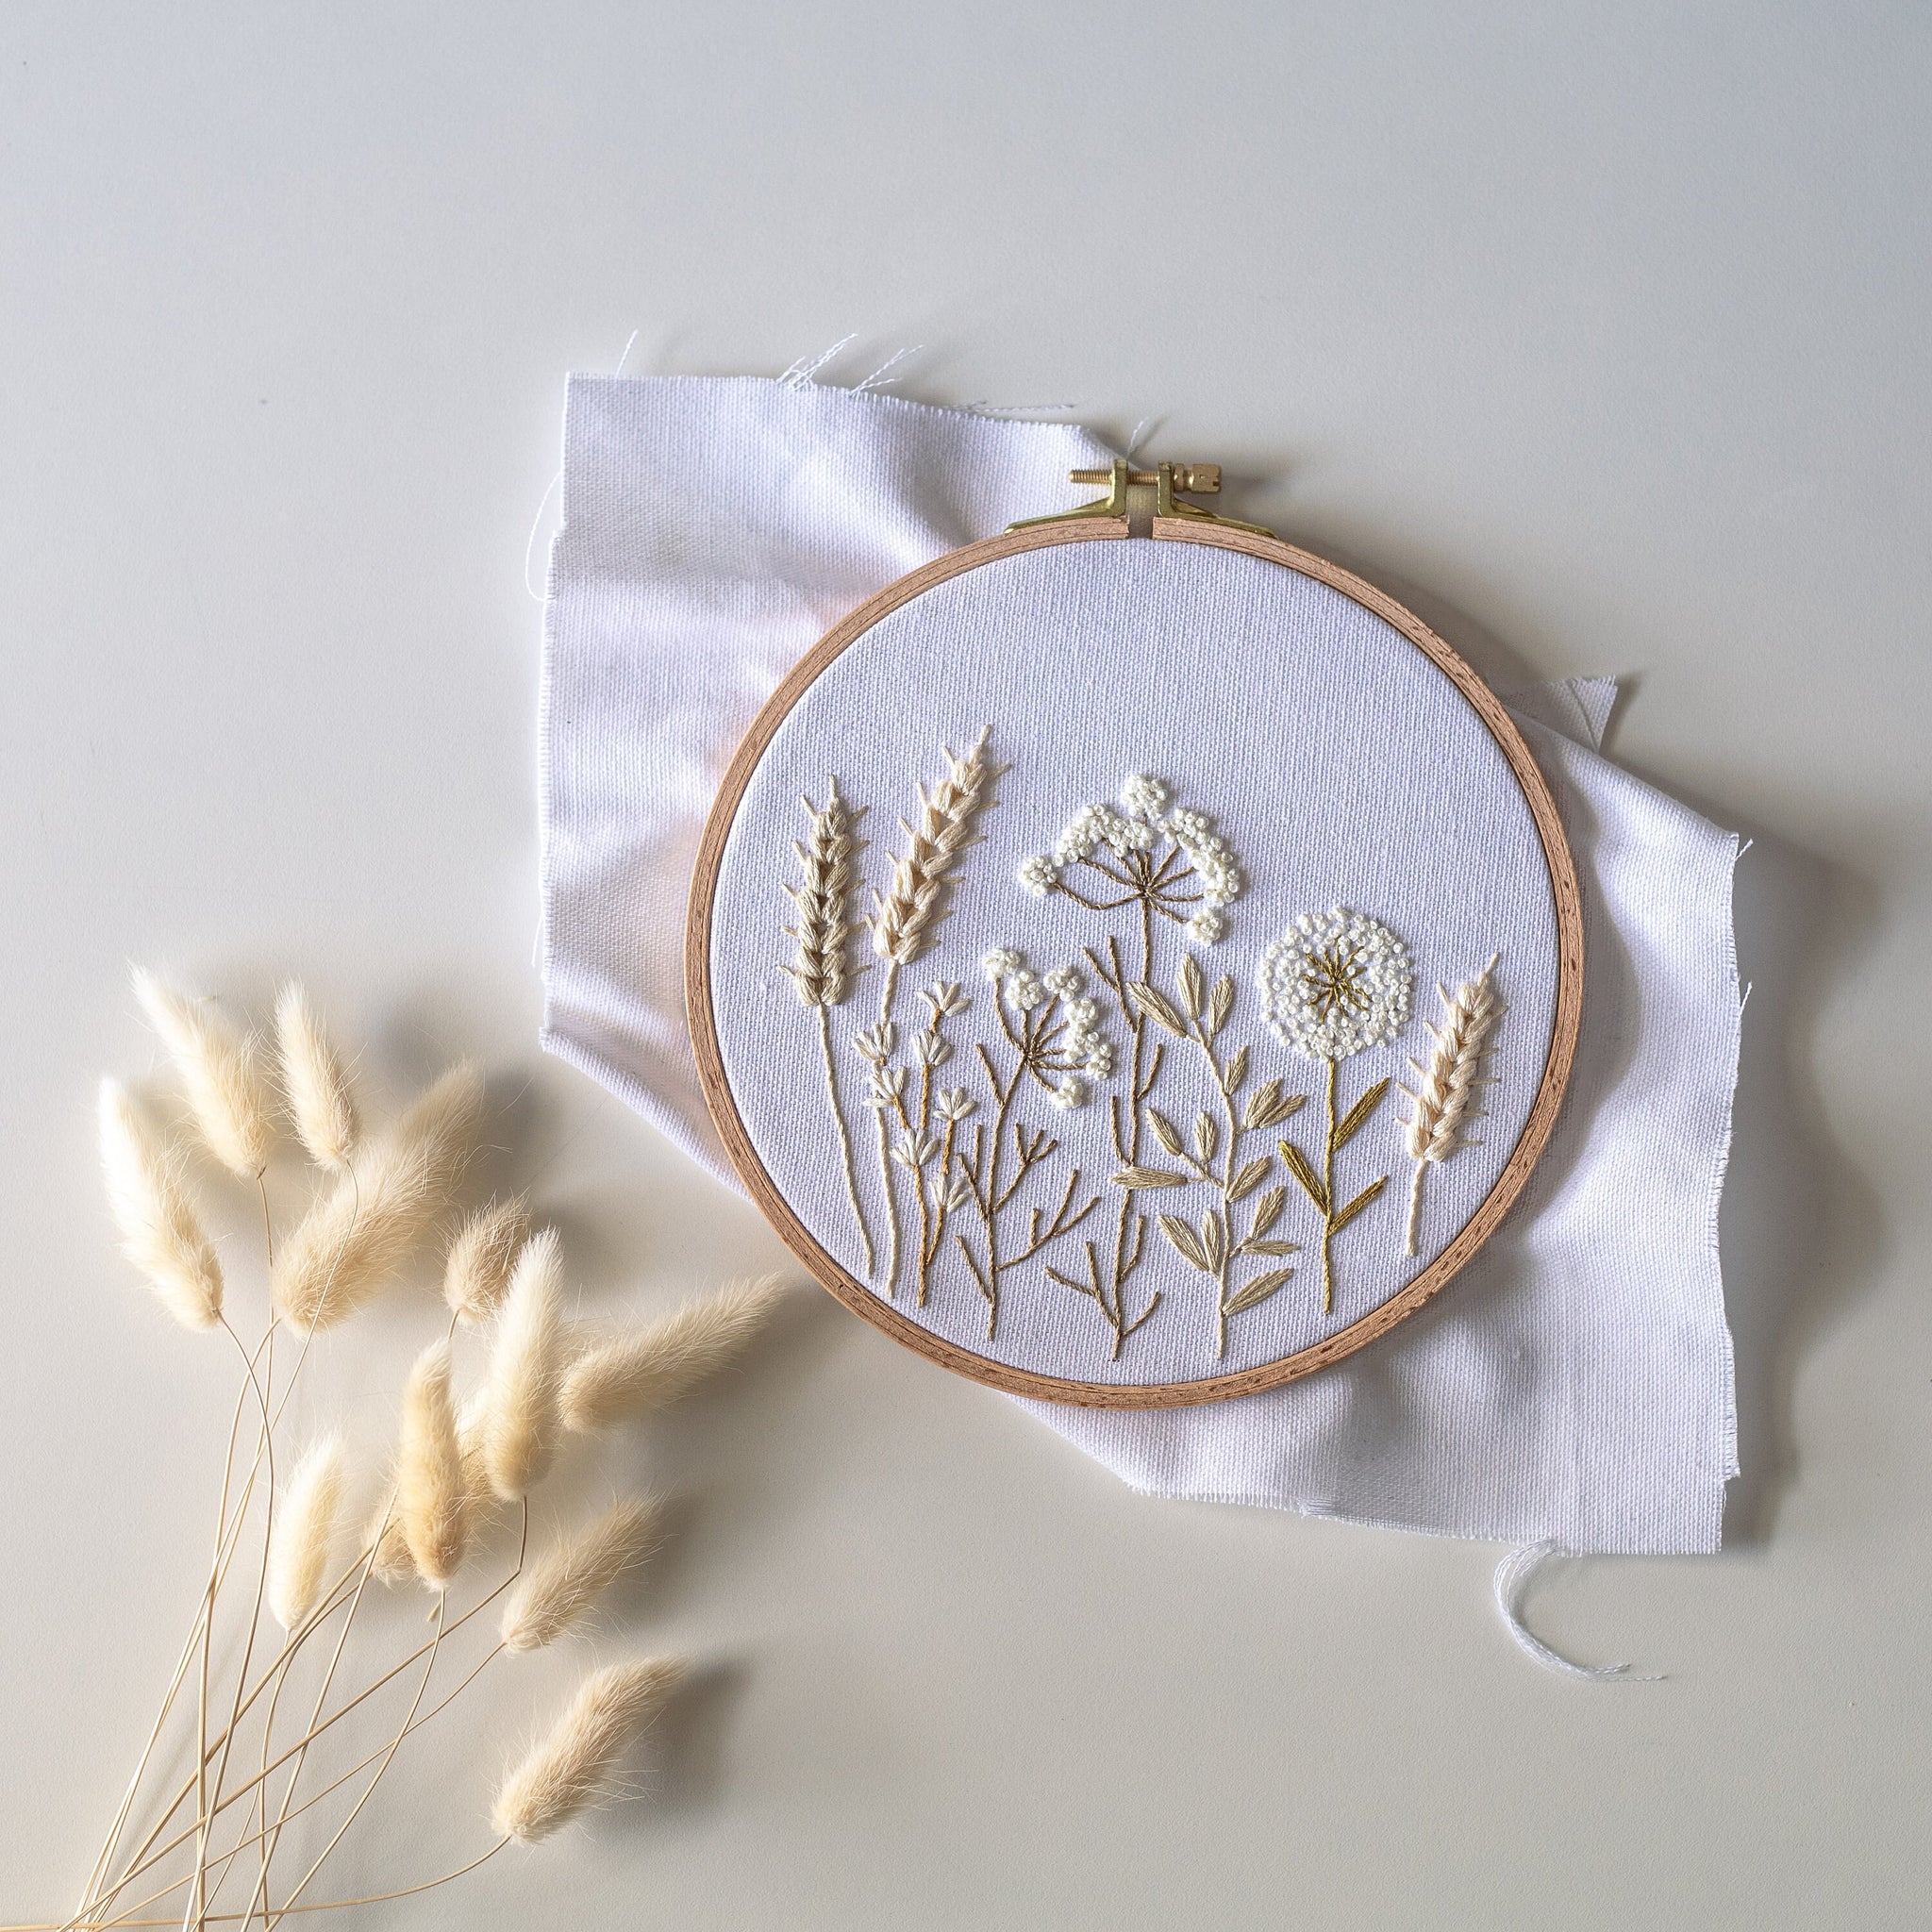 Botanical Hand Embroidery Designs Set, Wildflowers Embroidery